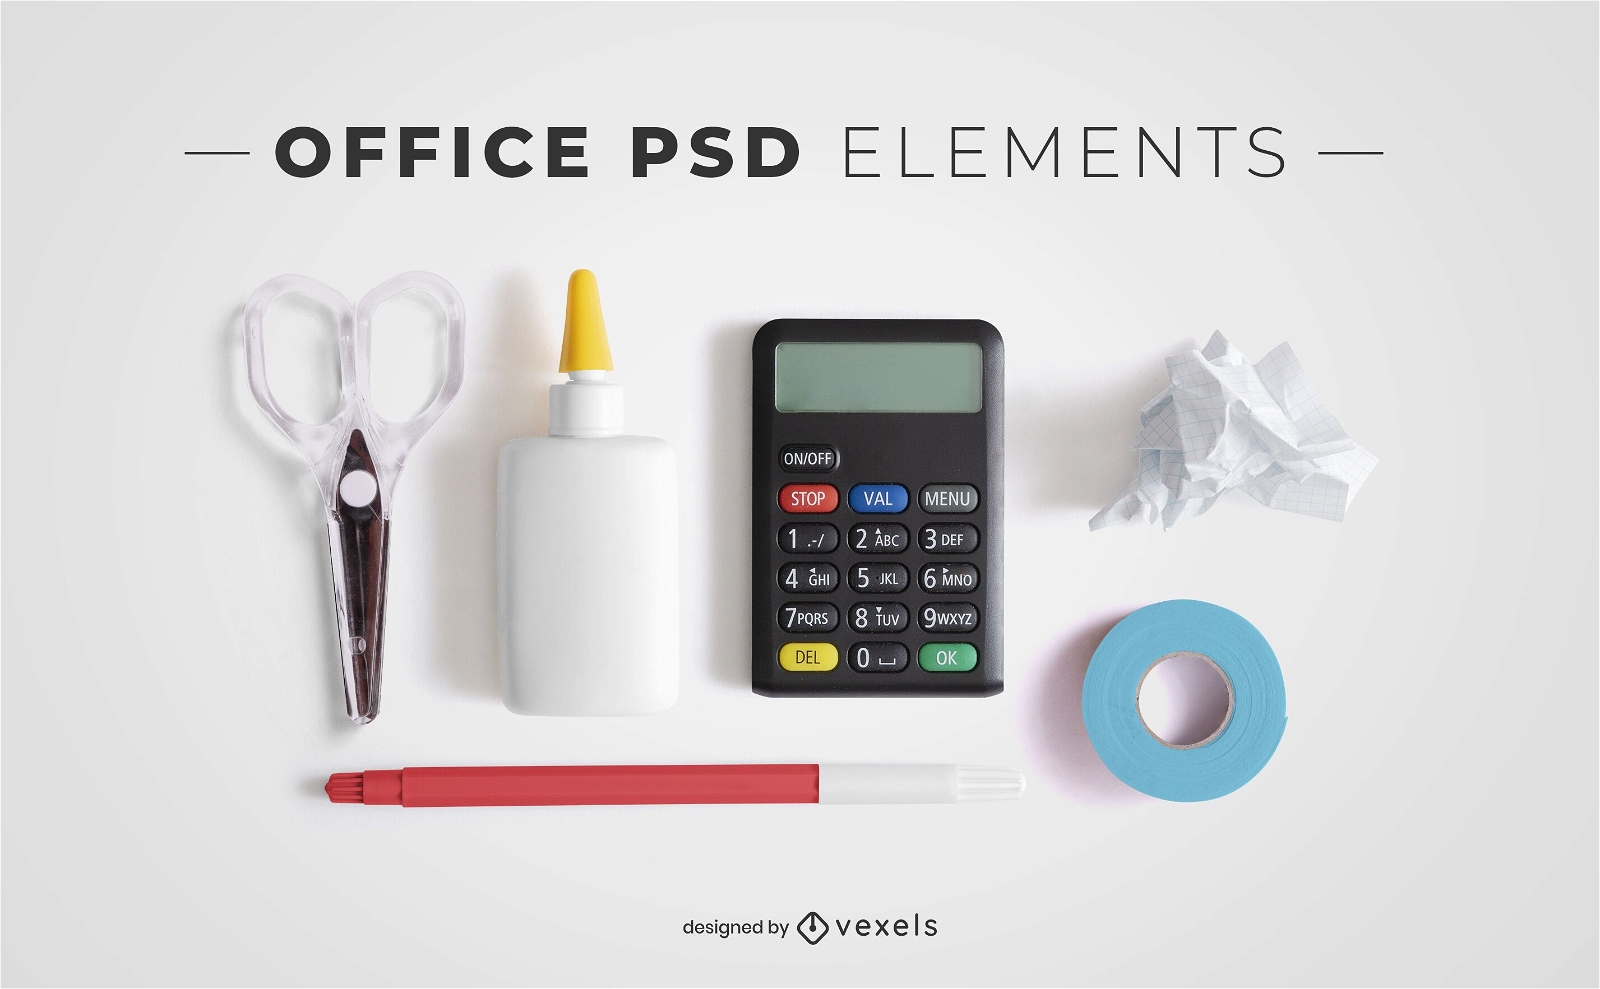 Office psd elements for mockups